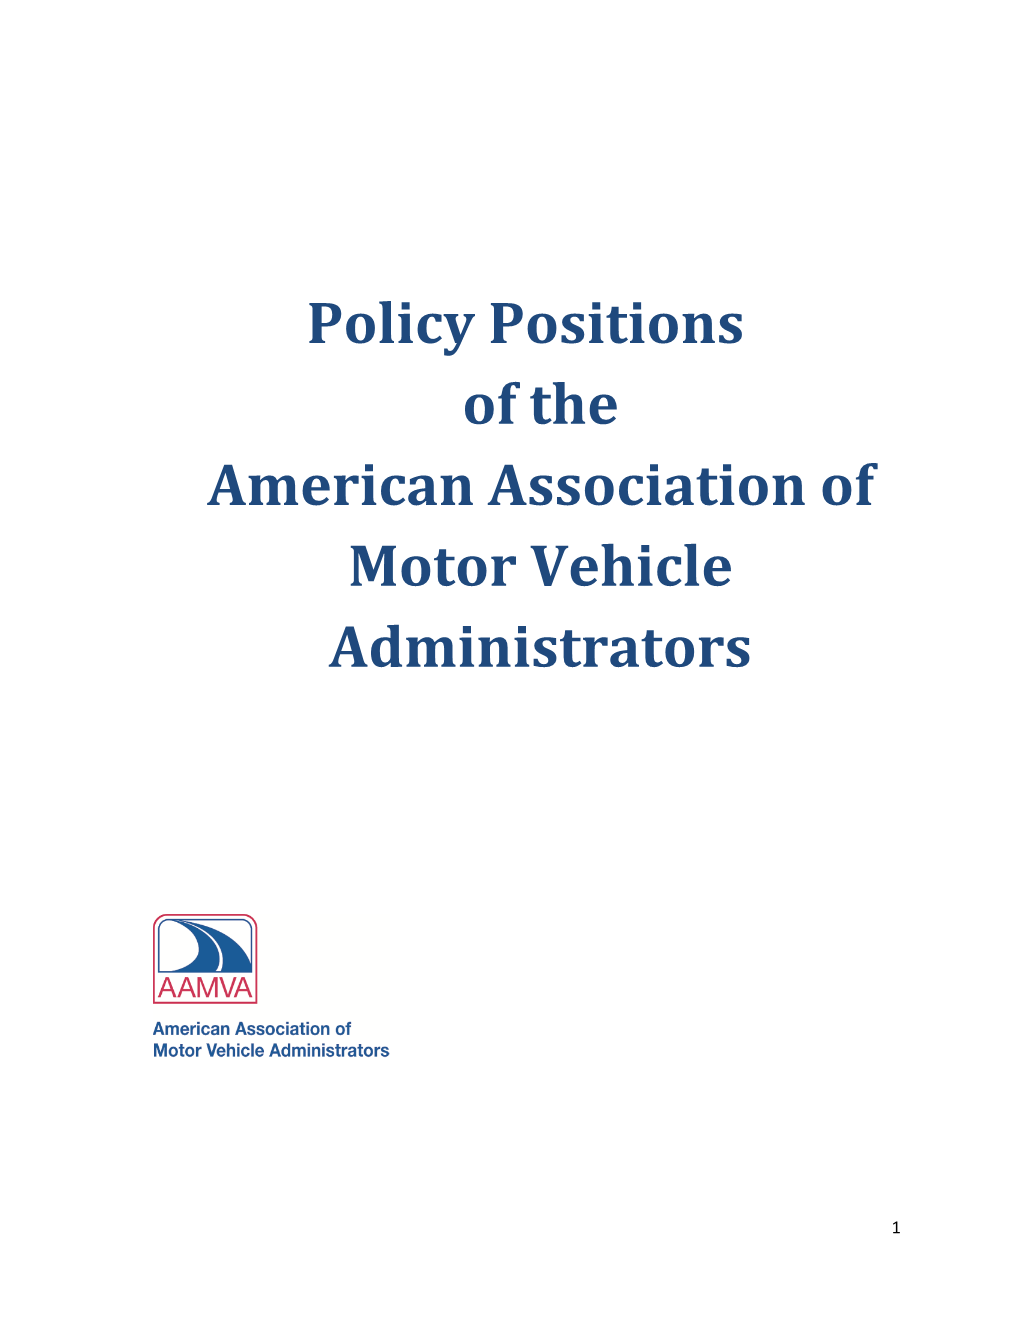 Policy Positions of the American Association of Motor Vehicle Administrators